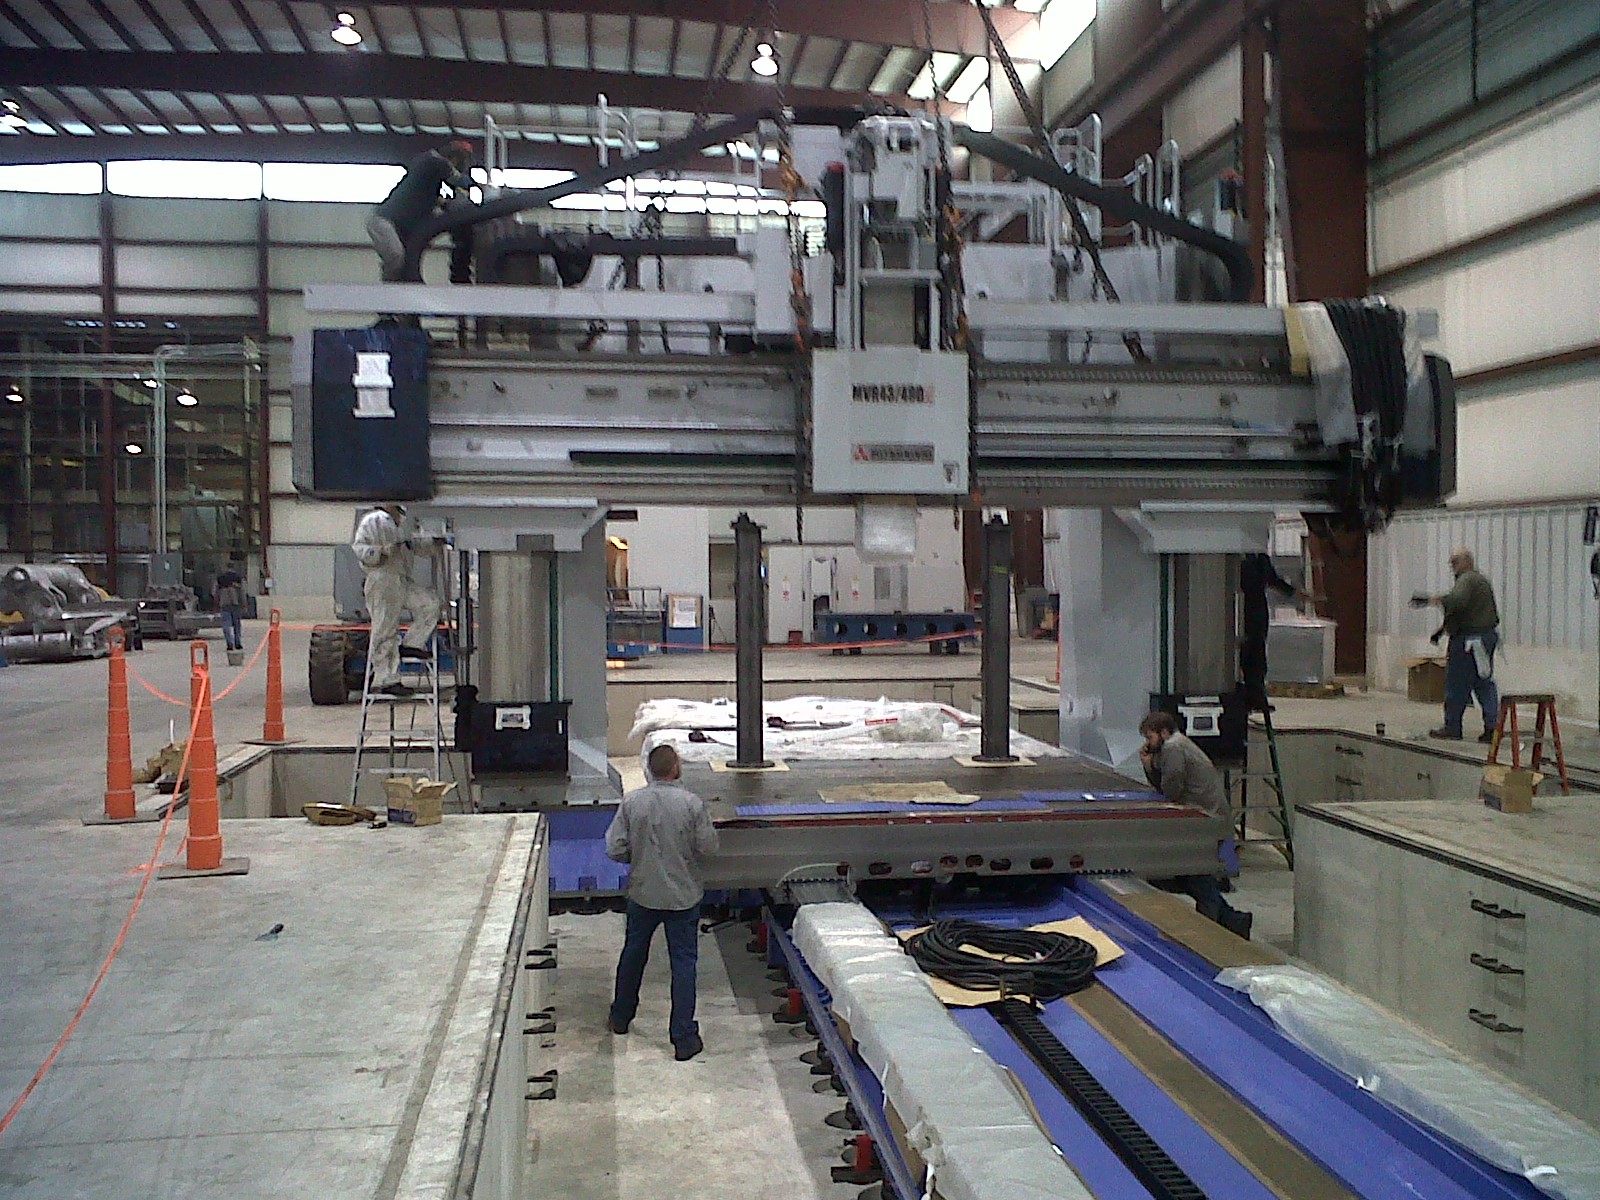 Cast vs. Fabricated Machine Tool Structure Design Impact on Supply Chain Design, Picture 1 – Large Machine Tool Structure – Cast Iron